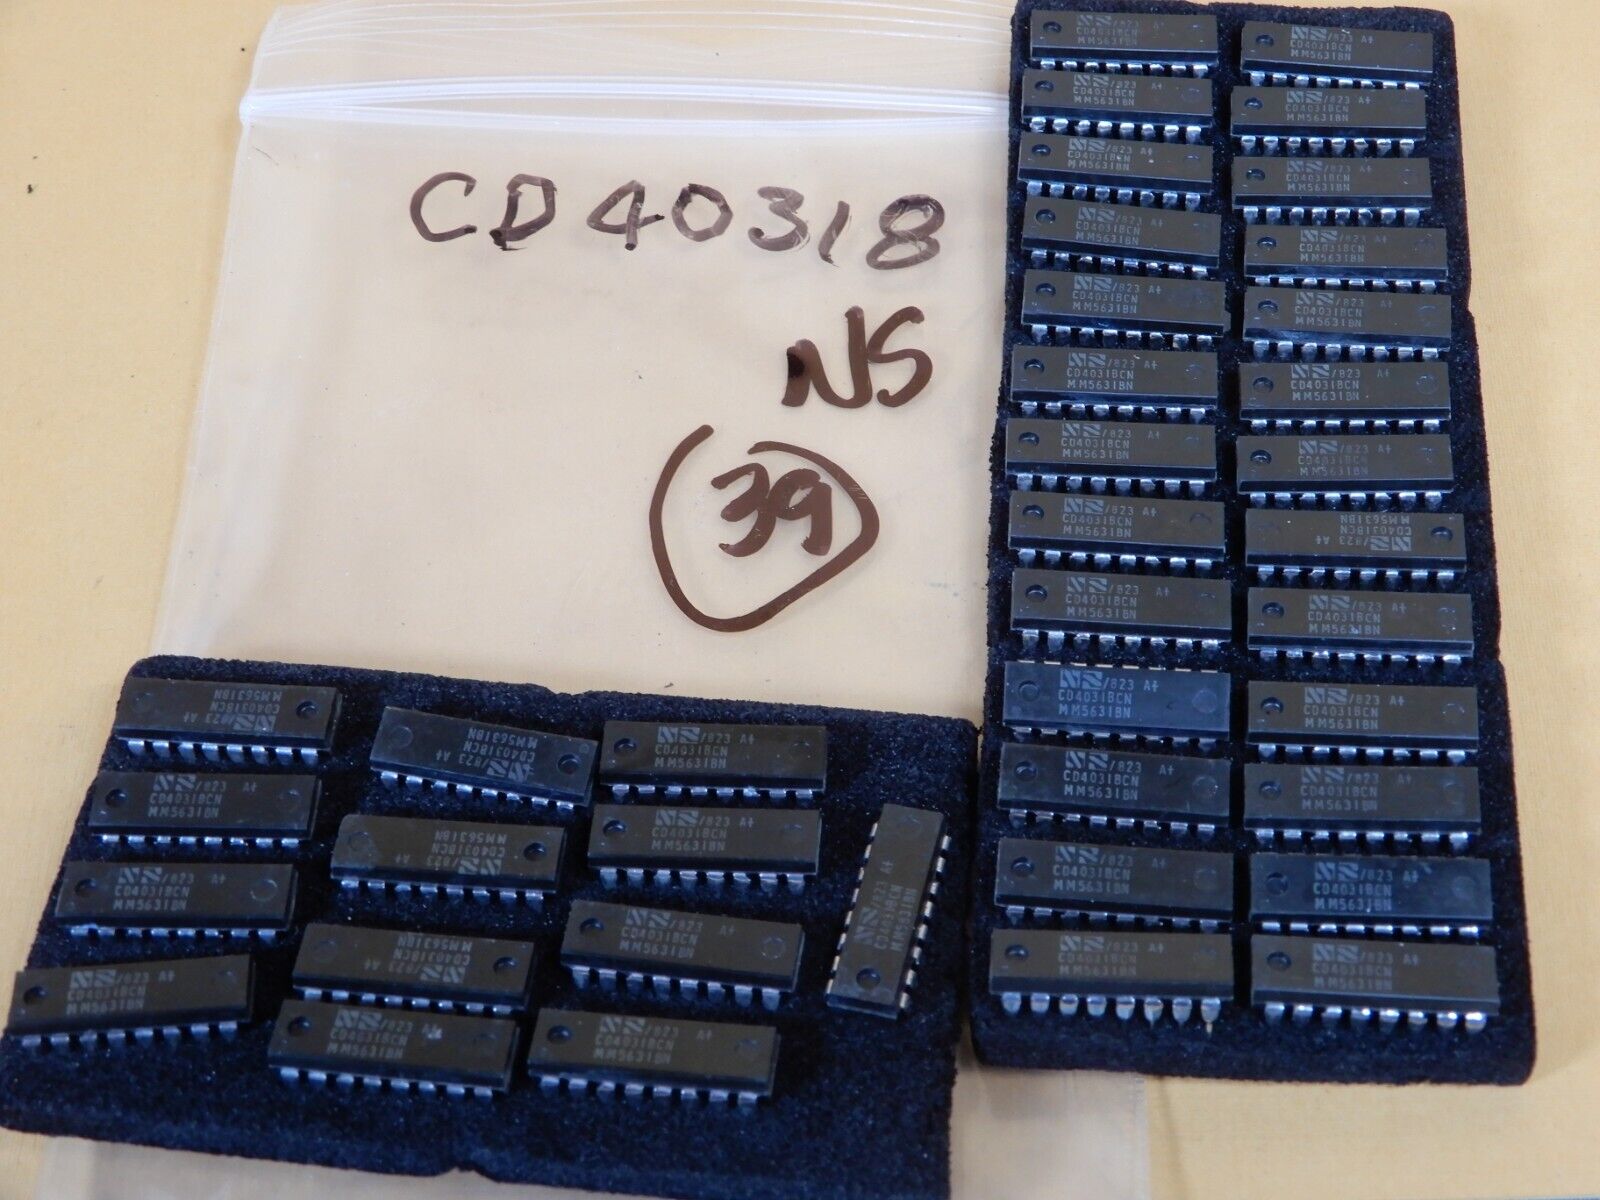 National Semiconductor CD4031BCN 16 Pin IC\'s Qty 39 NOS